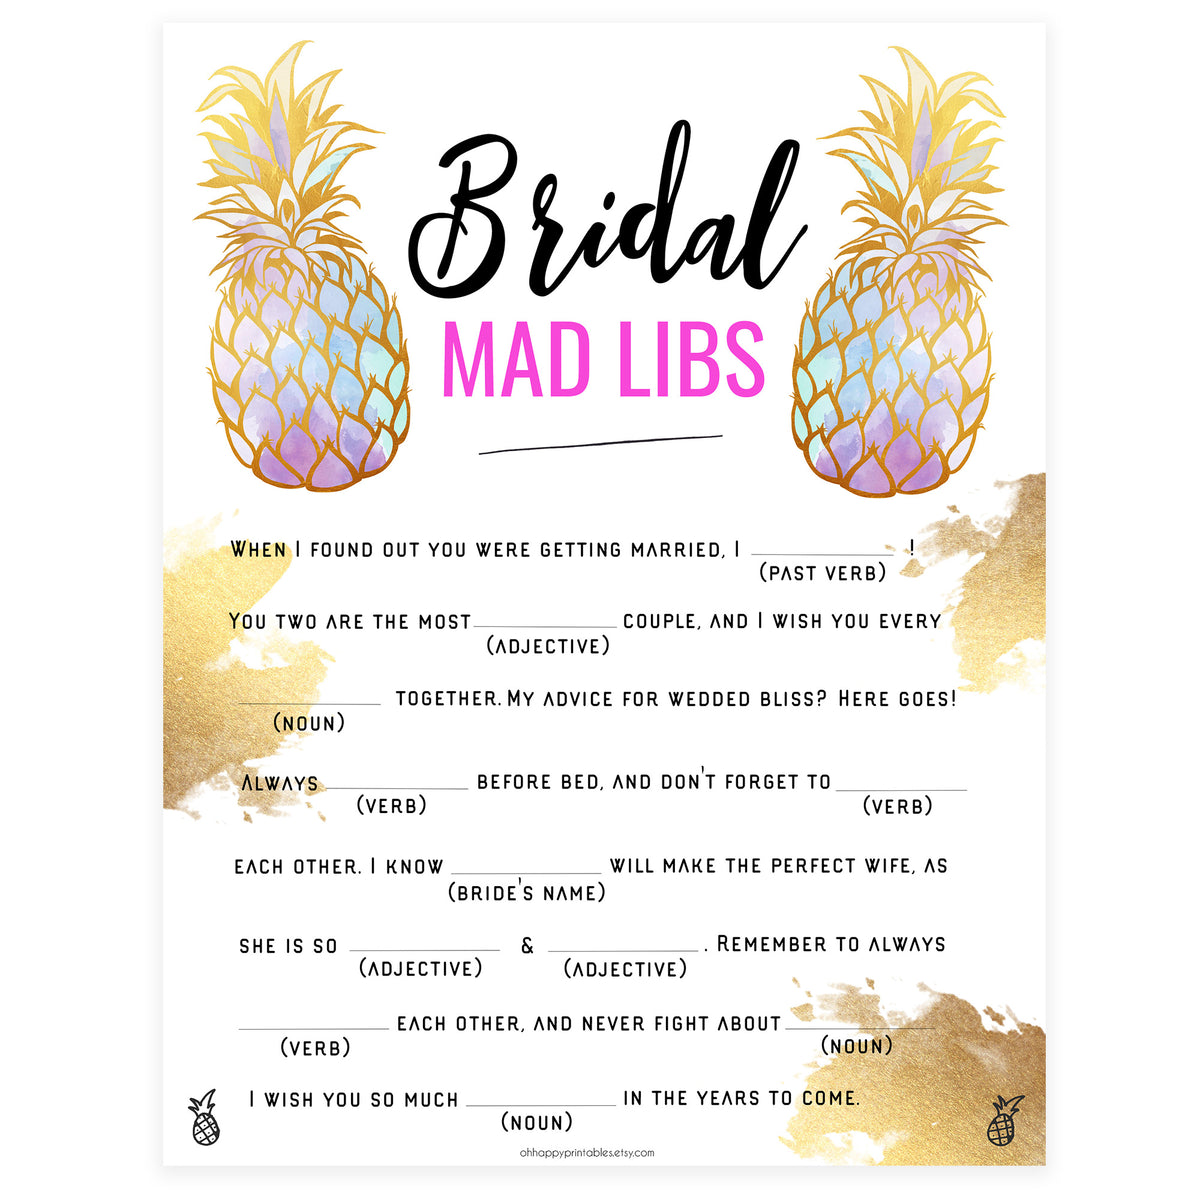 Bridal Mad Libs Game - Gold Pineapple